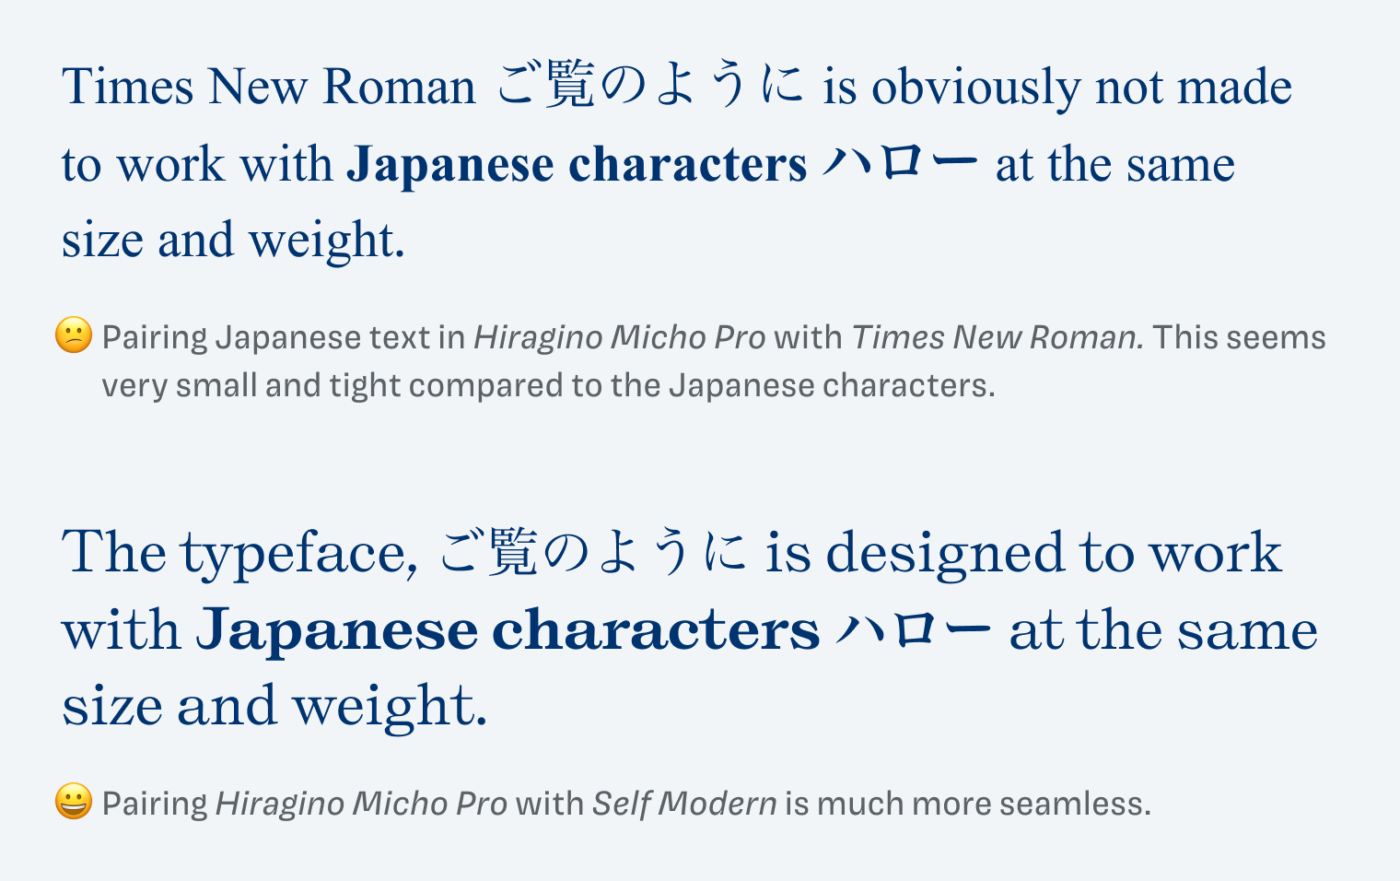 Pairing Japanese text in Hiragino Micho Pro with Times New Roman. This seems very small and tight compared to the Japanese characters.
Times New Roman ご覧のように is obviously not made to work with Japanese characters ハロー at the same size and weight.
Pairing Hiragino Micho Pro with Self Modern is much more seamless.
Pairing Japanese text in Hiragino Micho Pro with Times New Roman. This seems very small and tight compared to the Japanese characters.

